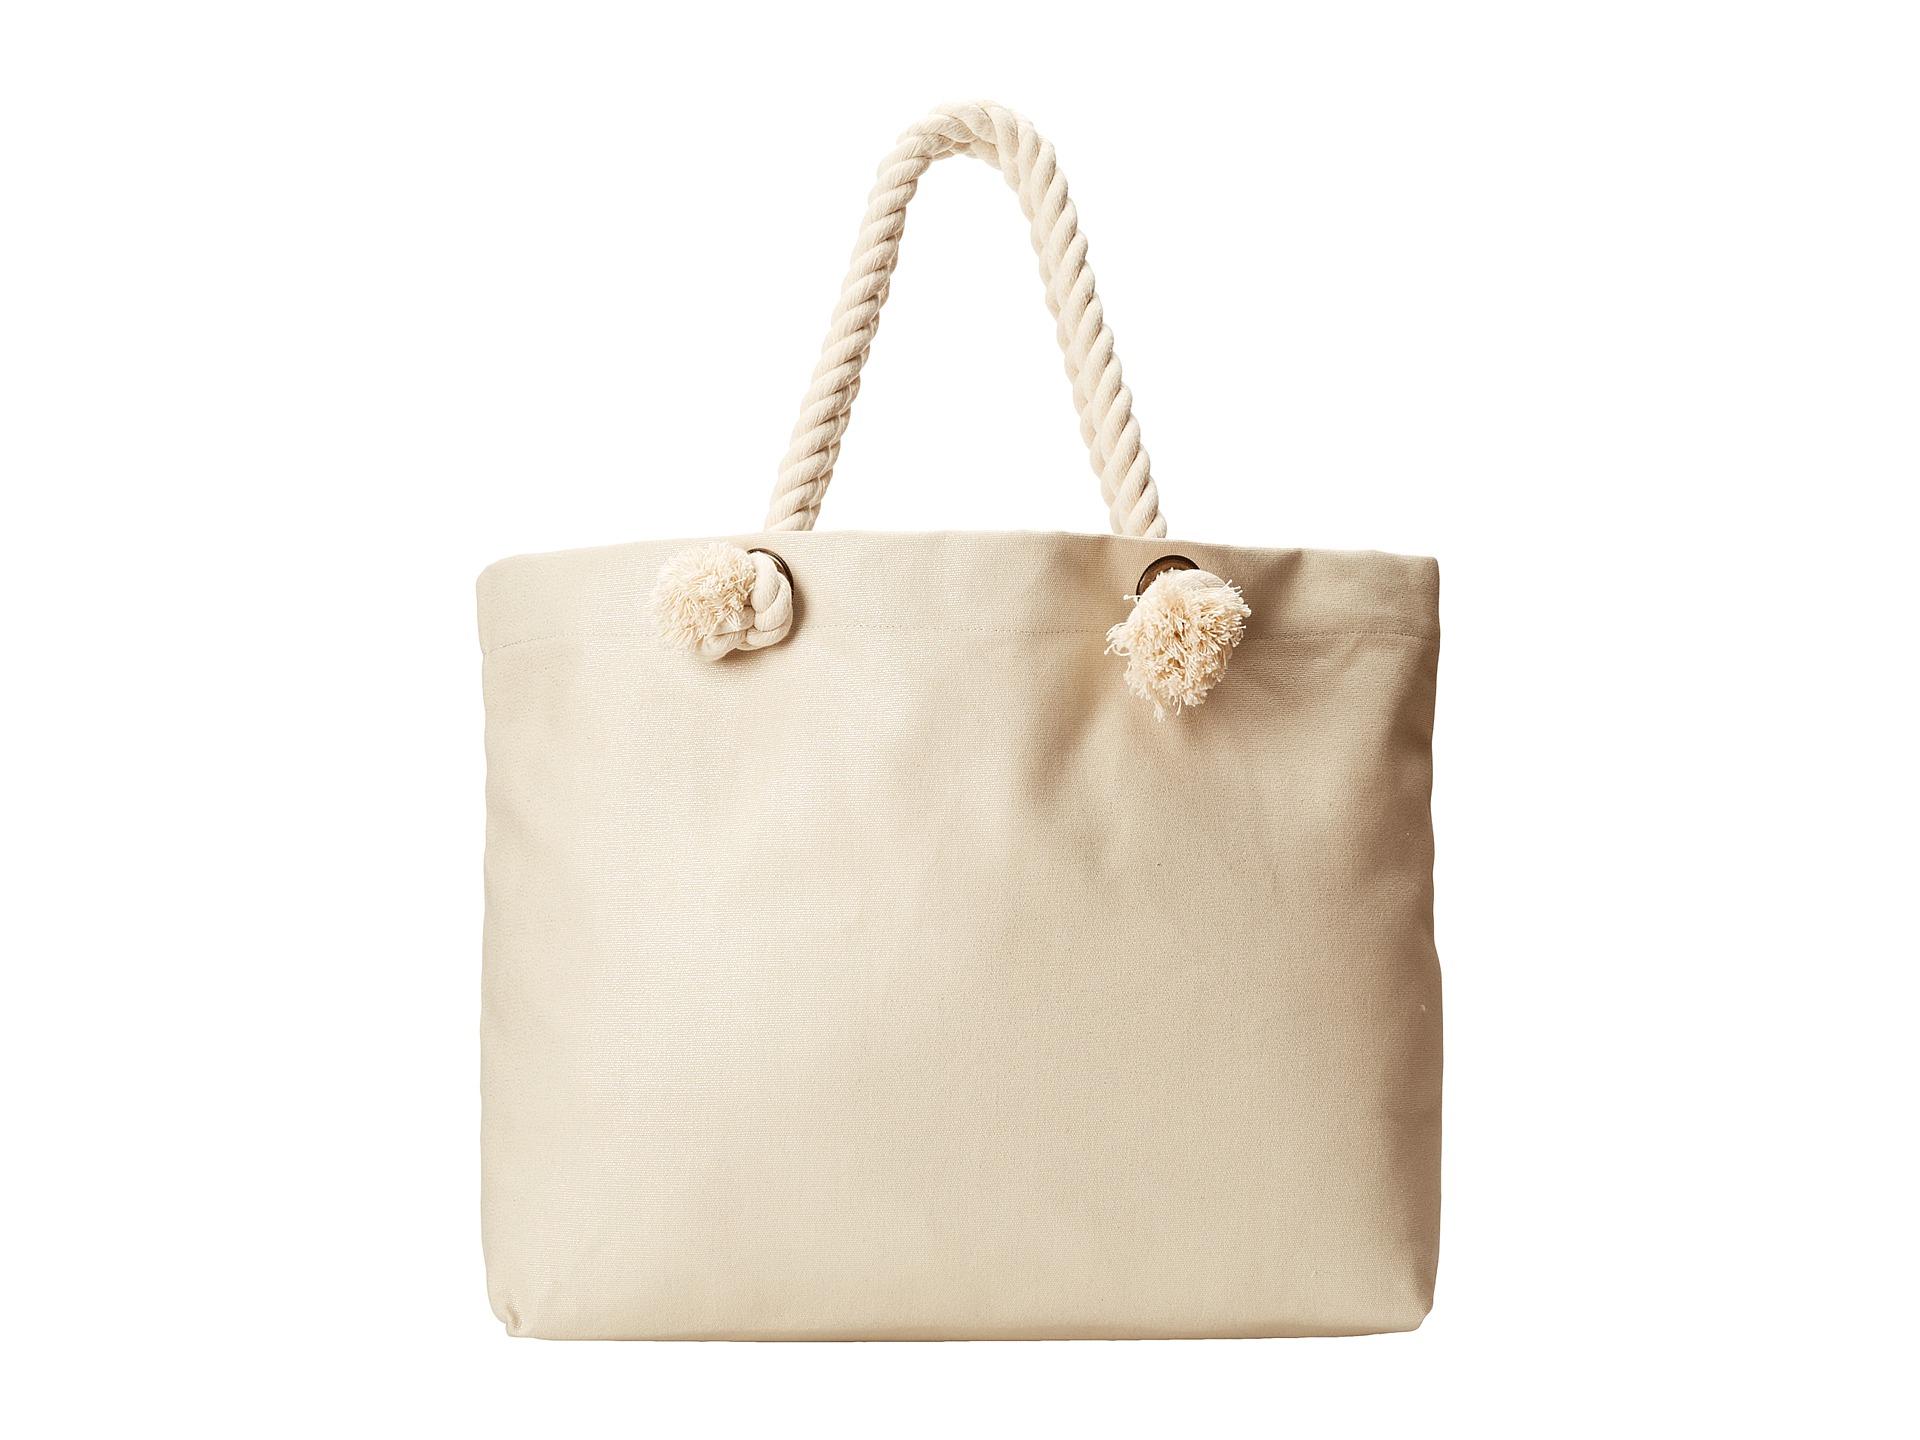 Hat Attack Perfect Canvas Beach Tote w/ Rope Handles - Zappos.com Free